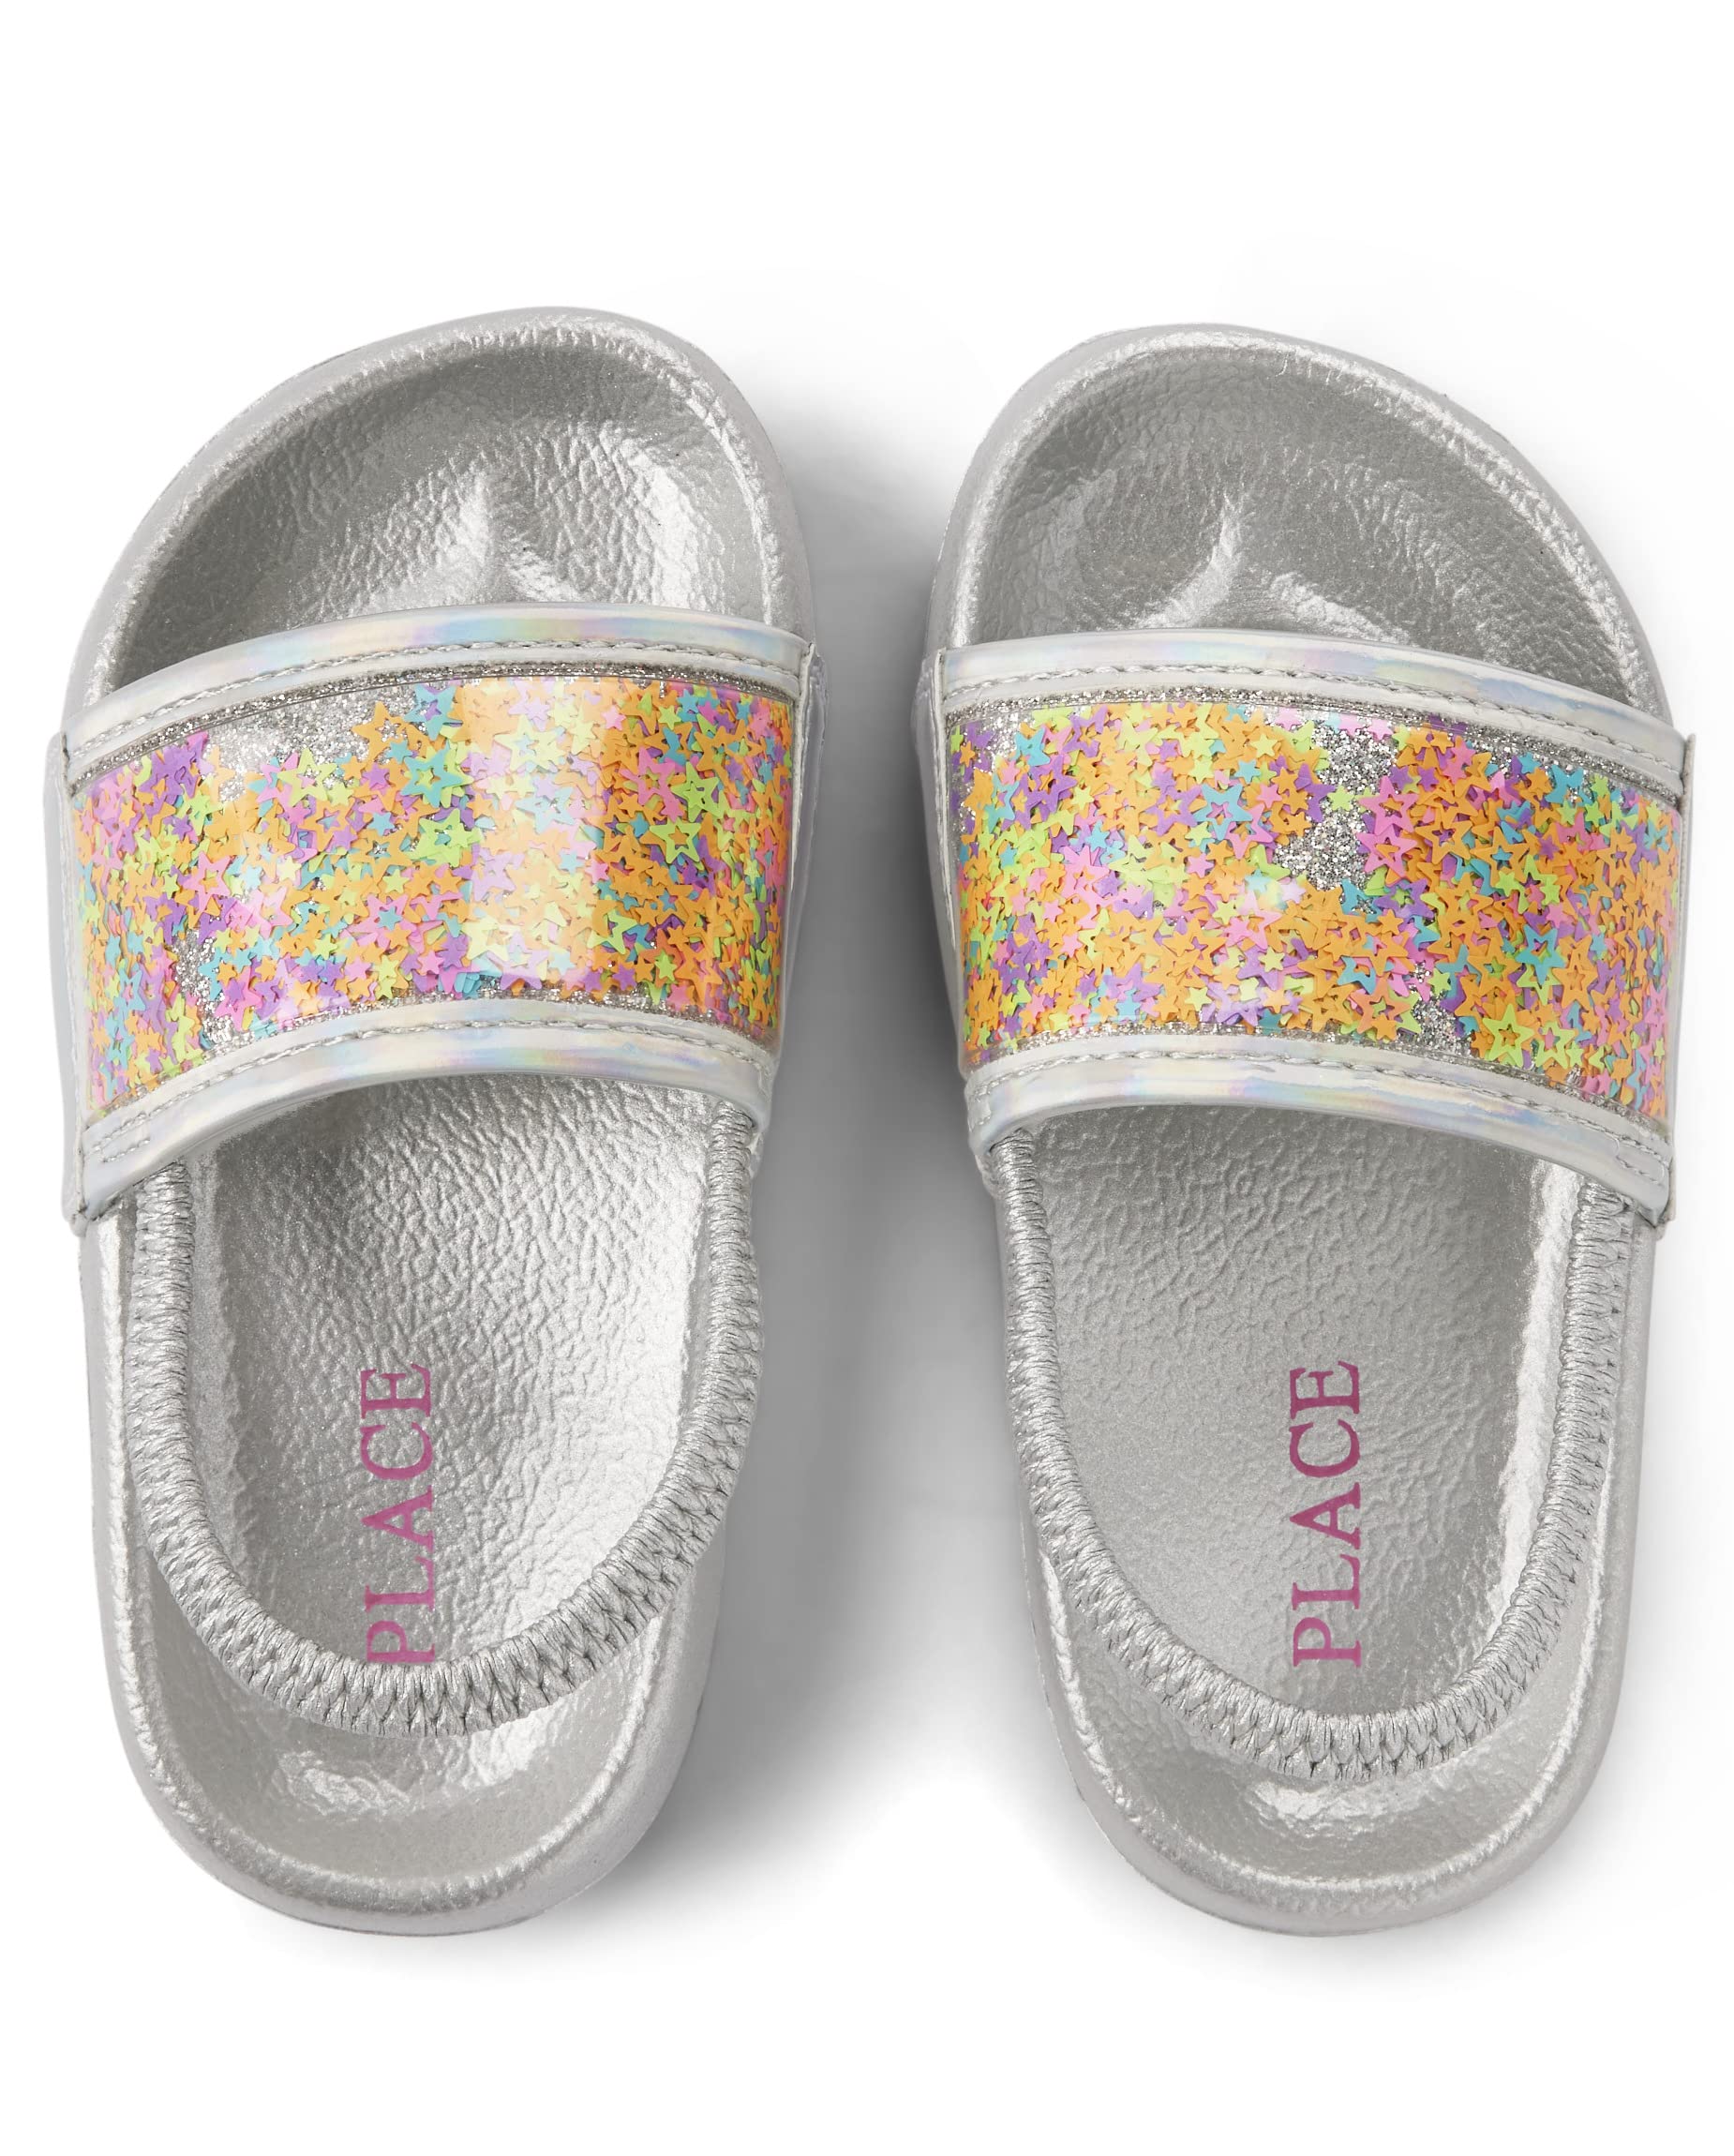 The Children's Place Girl's and Toddler Slides with Backstrap Sandal